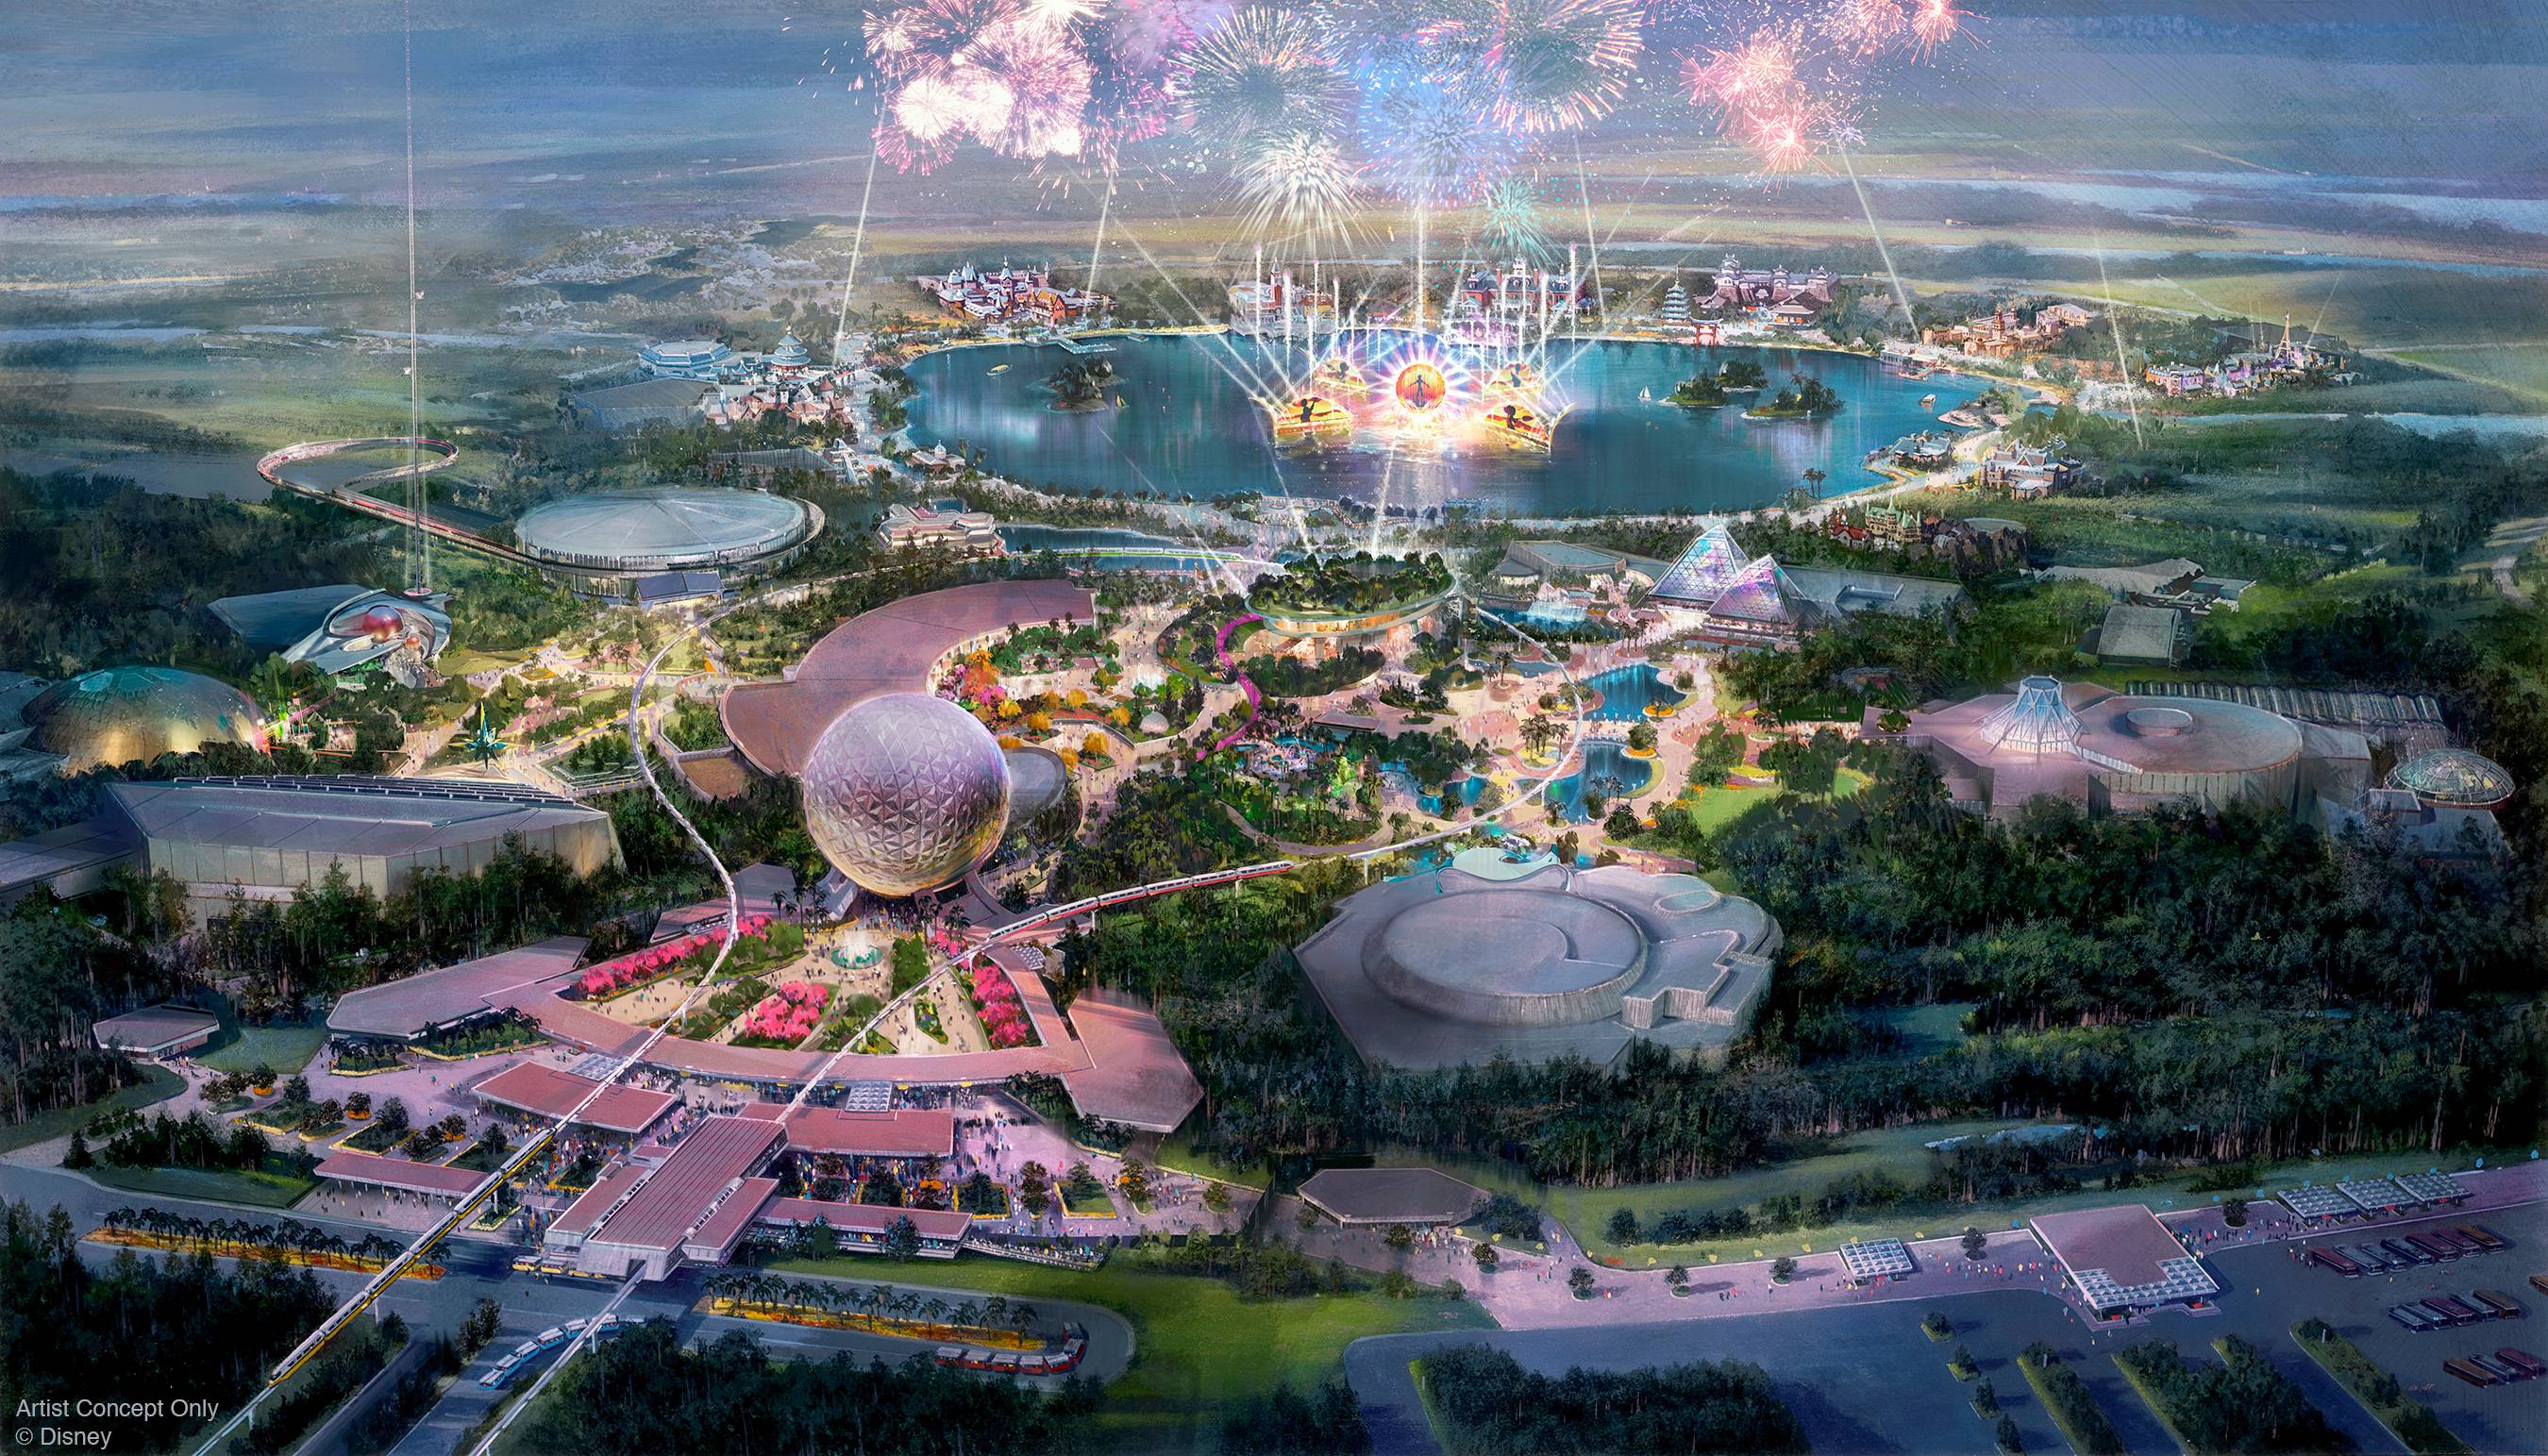 PHOTOS - New concept art shows more of Epcot's redesign including new names for Future World areas